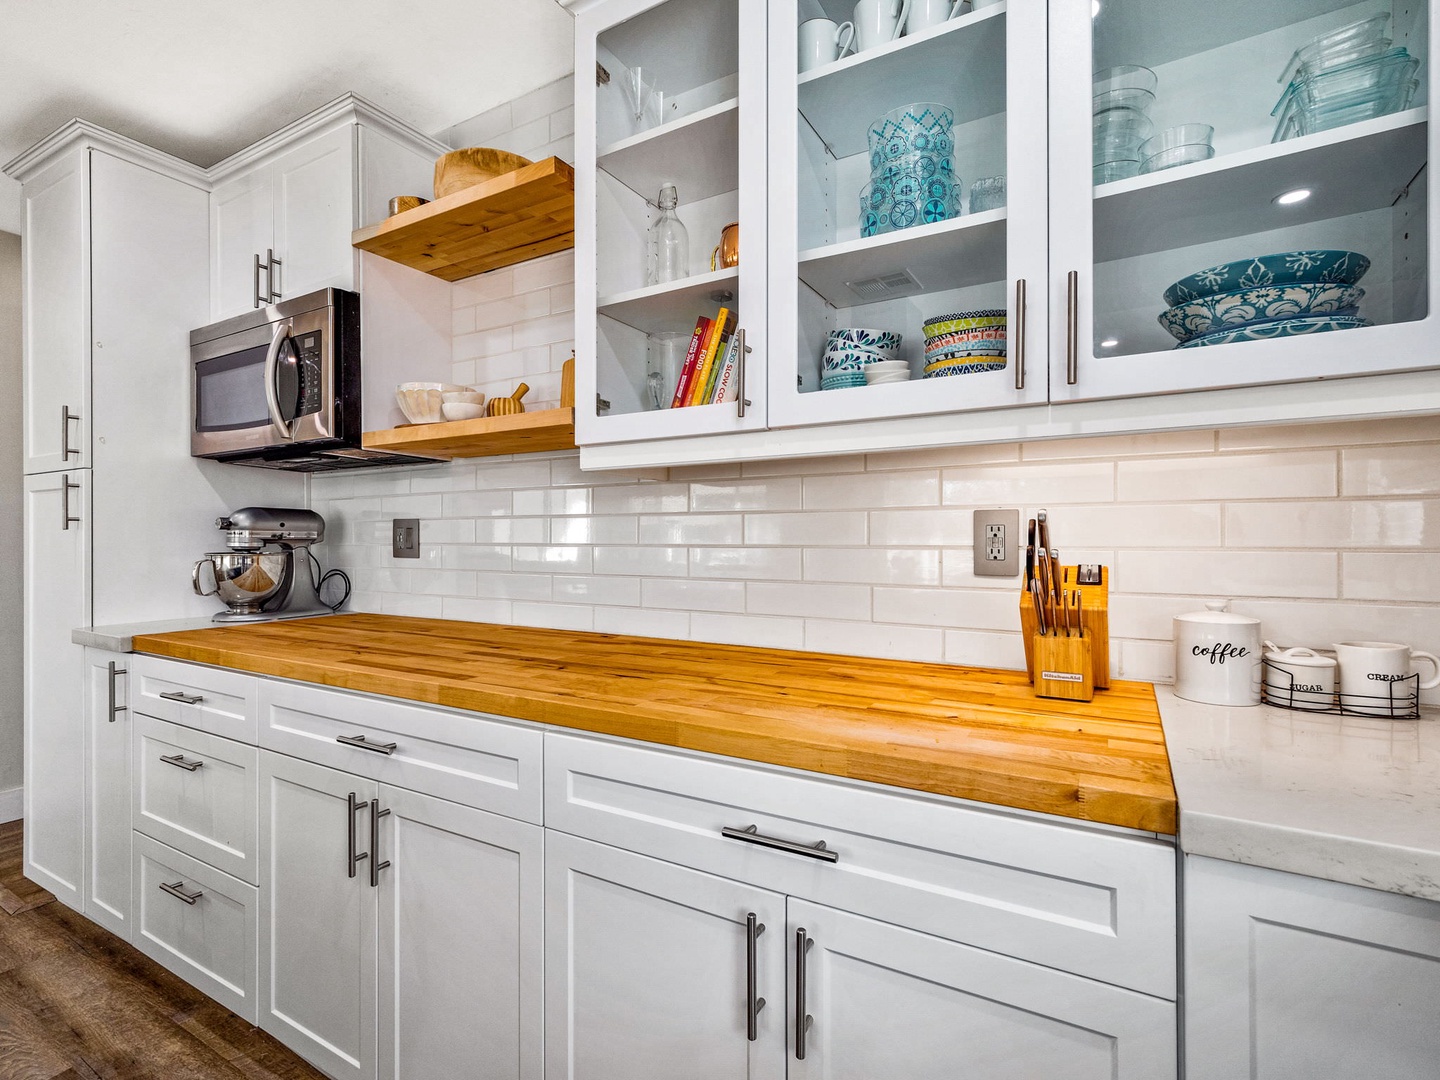 Chef inspired butcher block counters